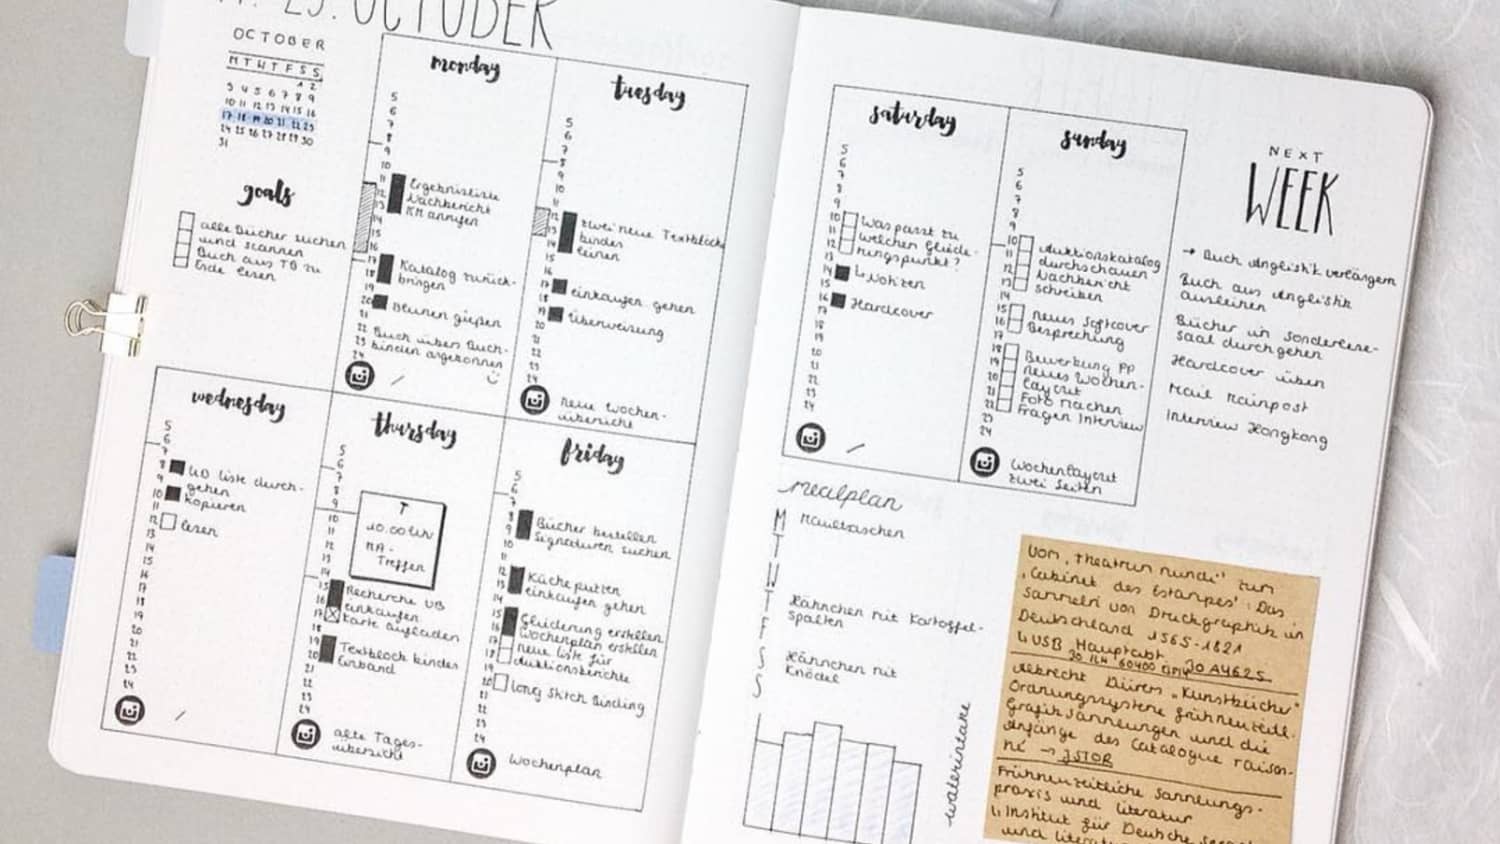 Bullet Journal Collections 101: The What, Why, How & 550+ Bujo Collection  Ideas!